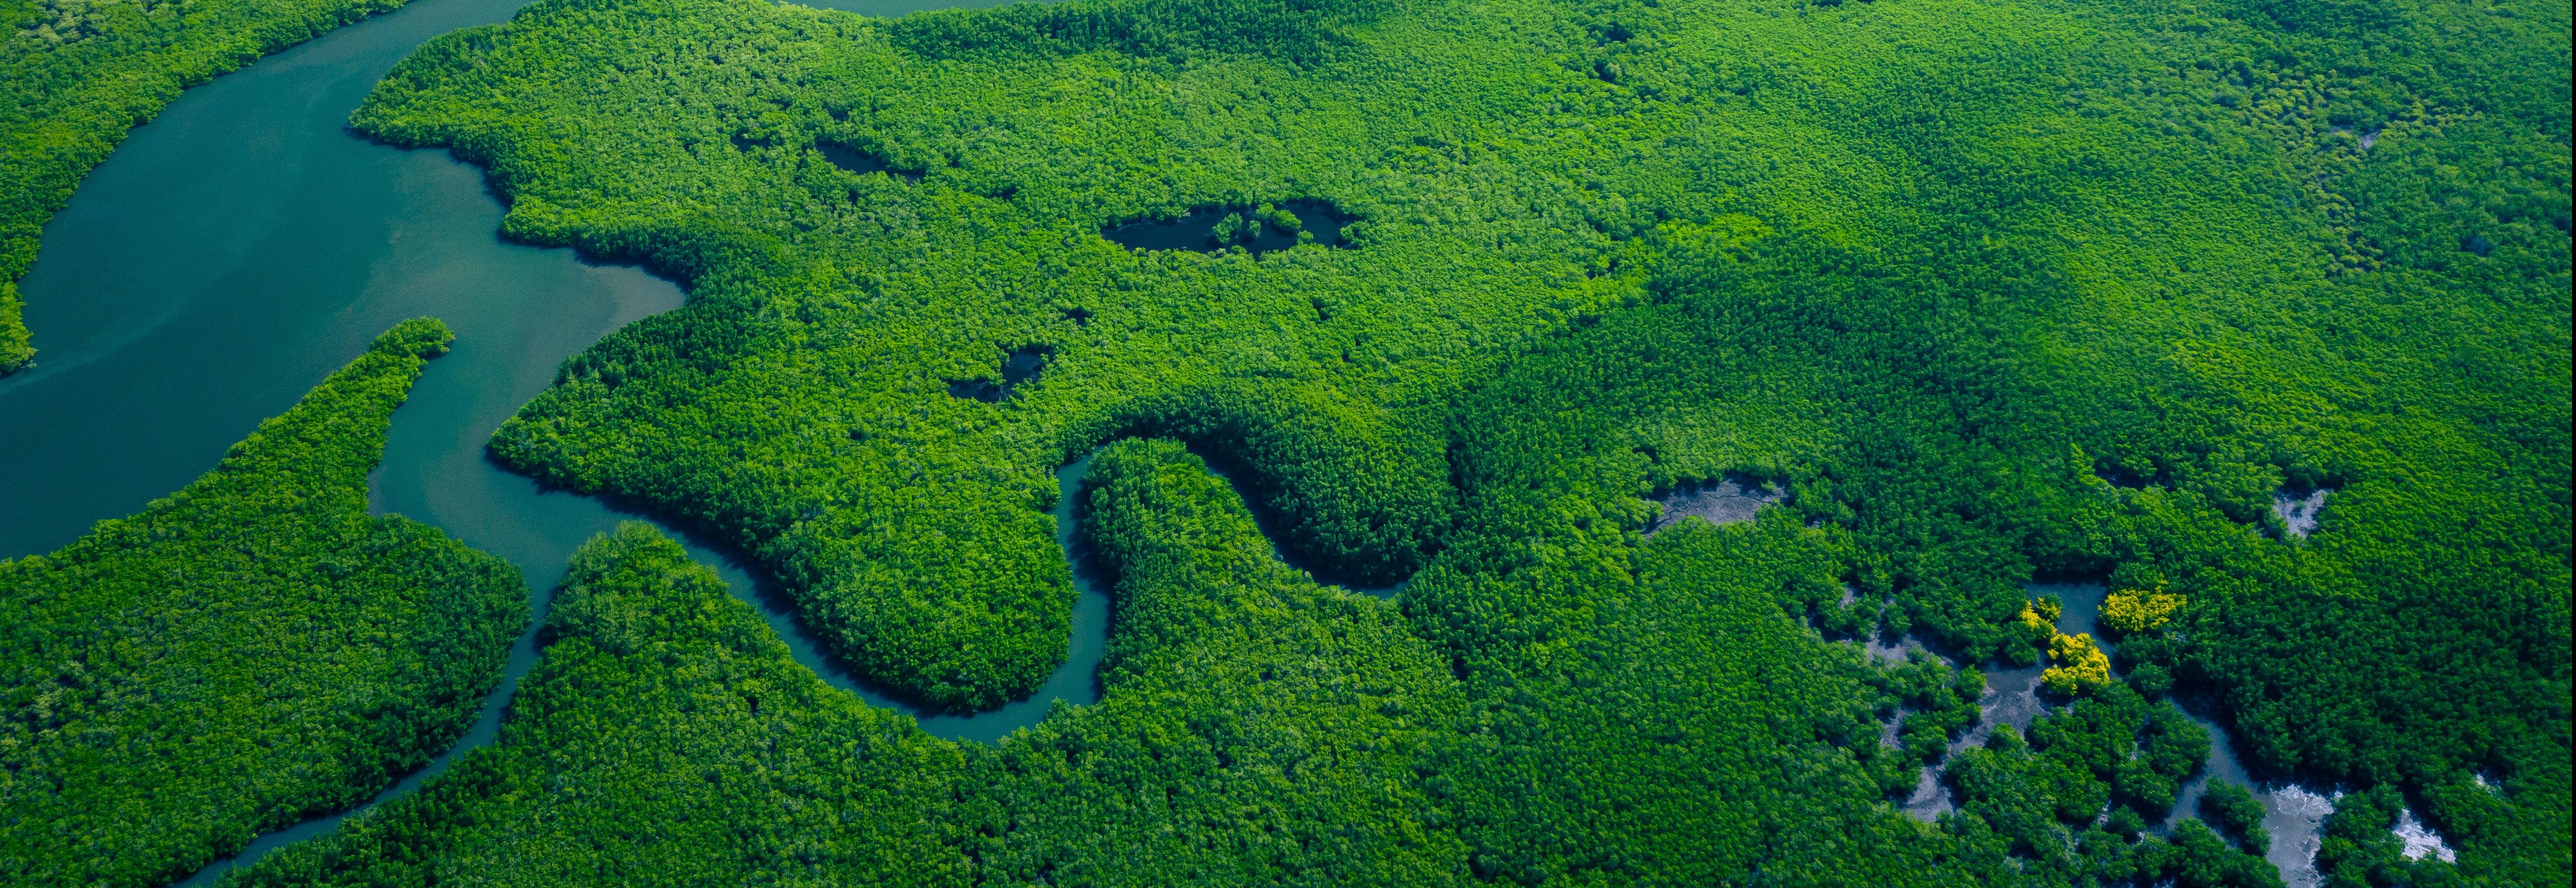 Mangrove forest aerial image_© Adobe Stock